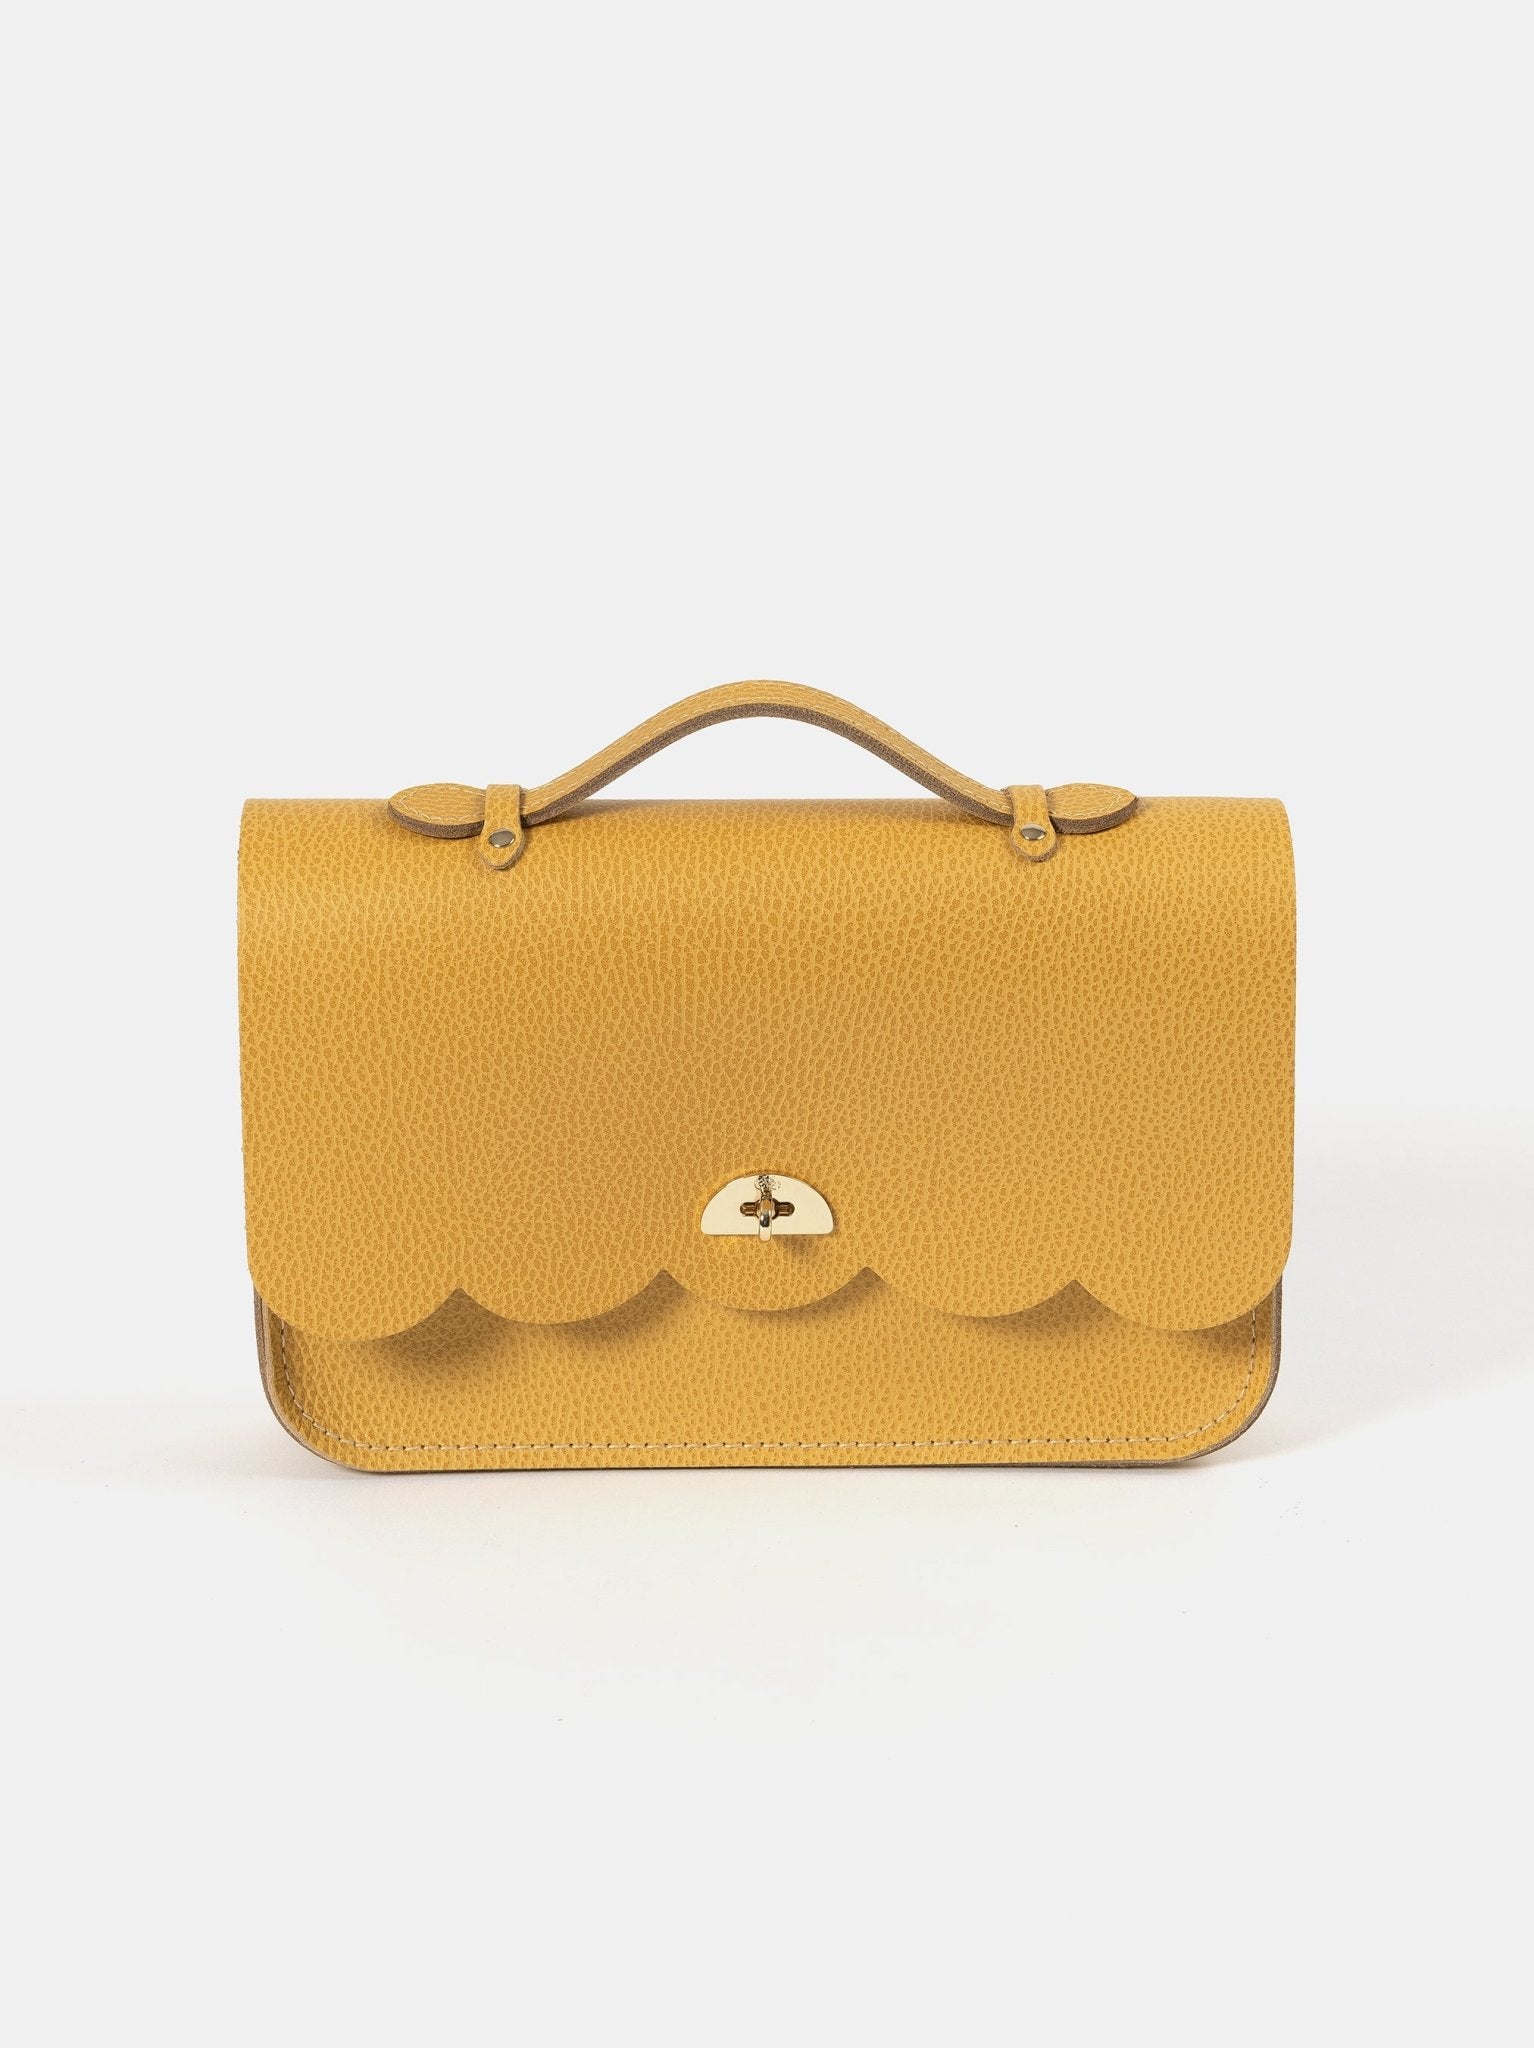 The Cloud Bag with Handle -  Indian Yellow Grain Matte